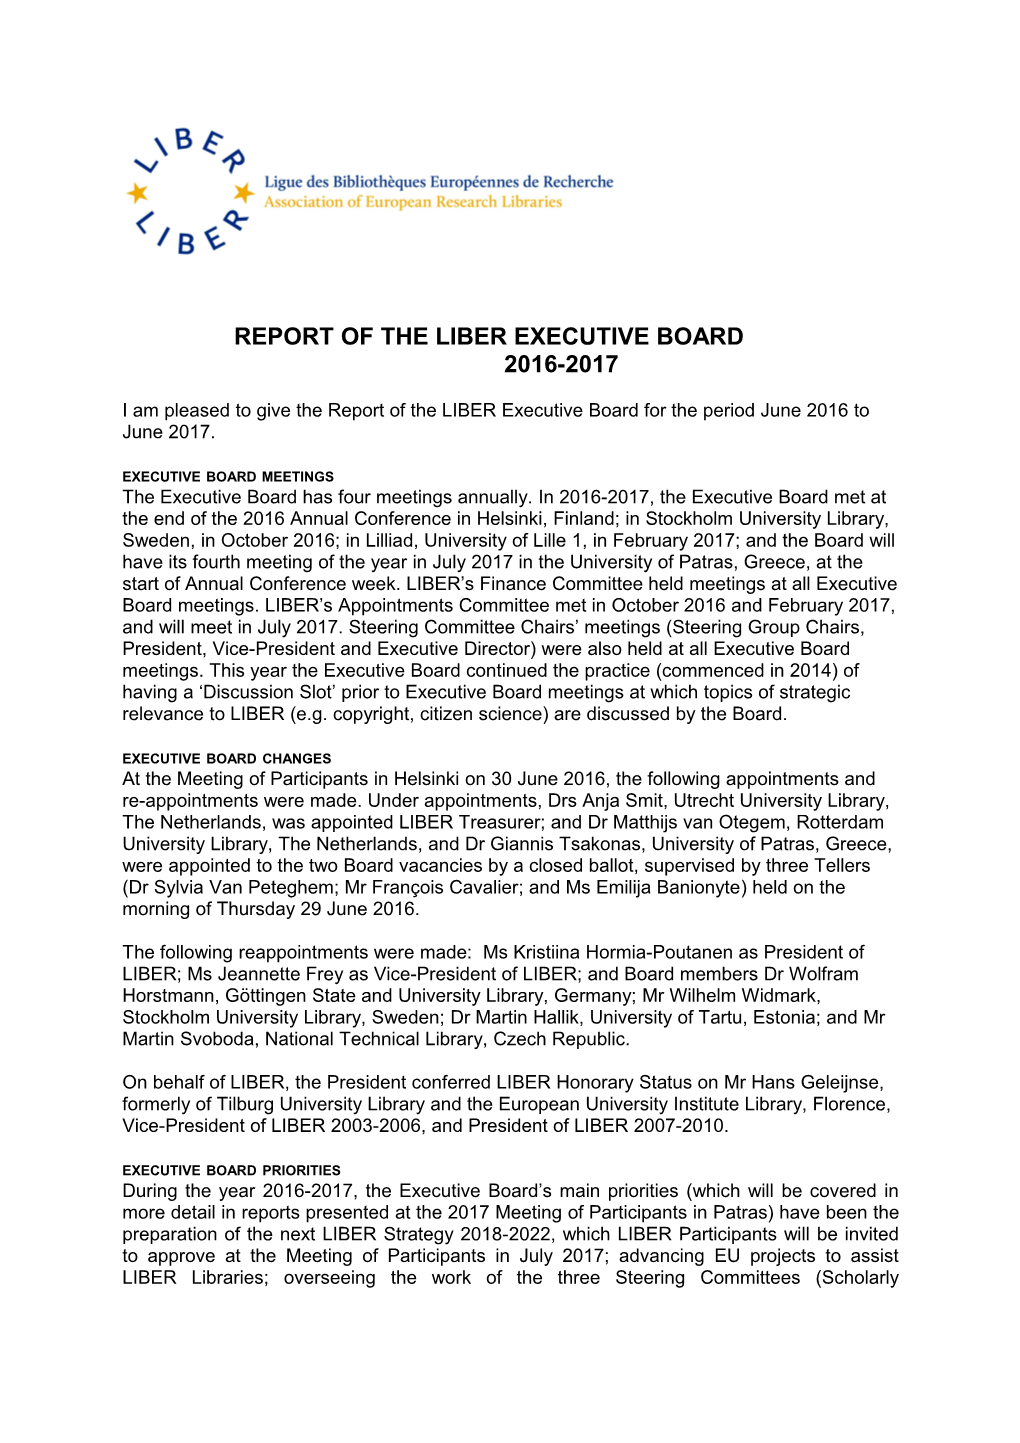 Report of the Liber Executive Board